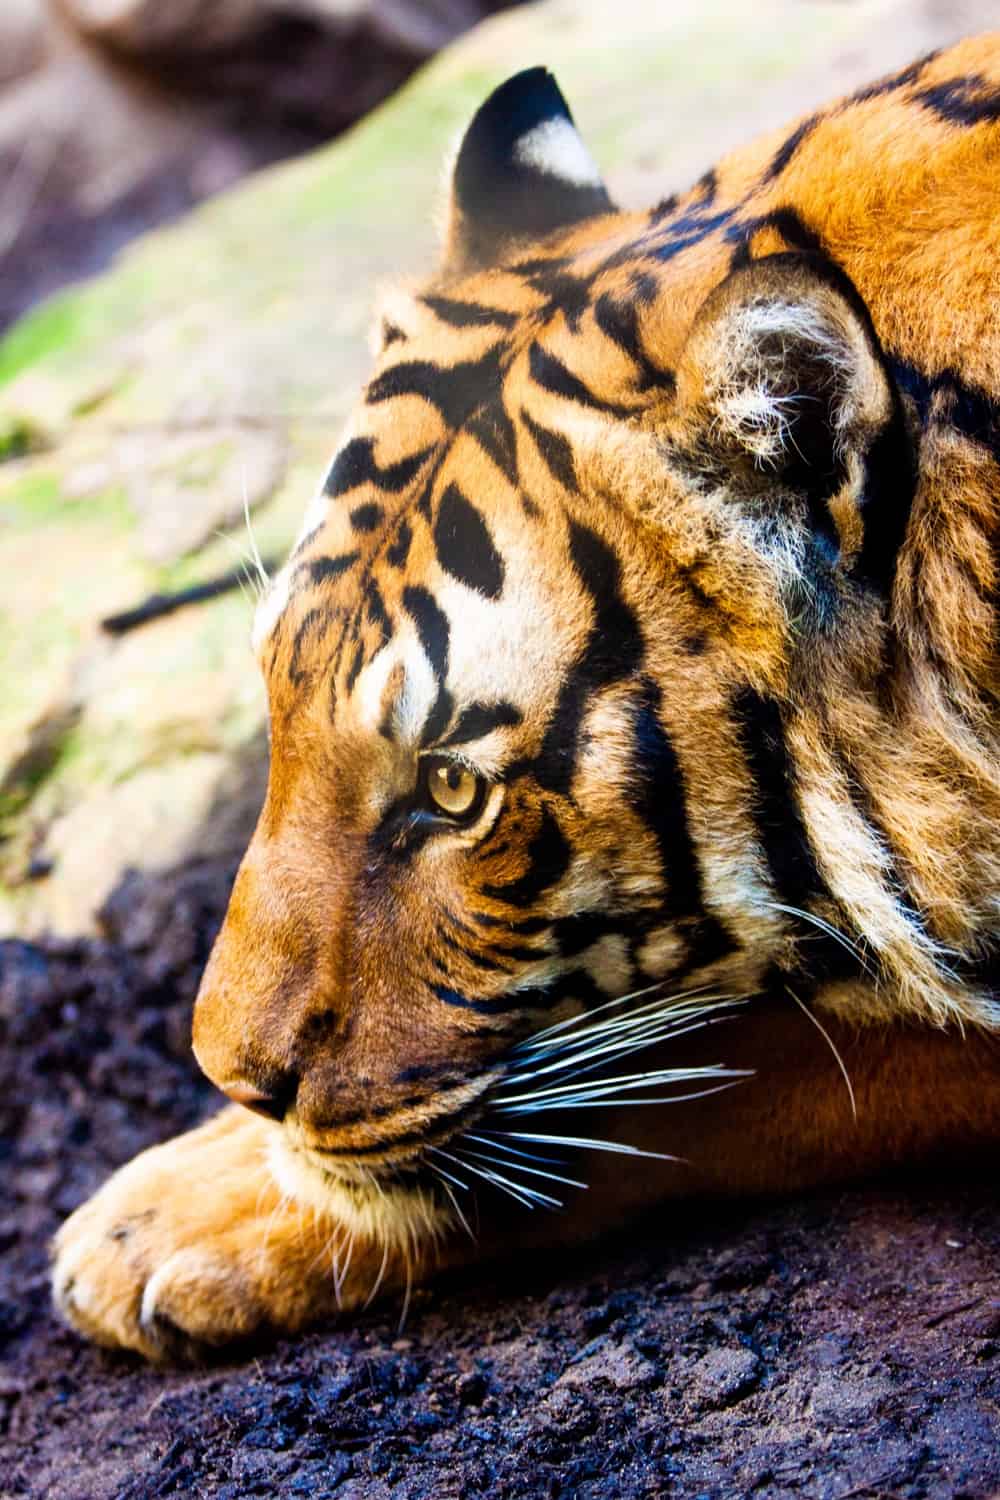 Tiger crouching face with Eye open and green rocks background